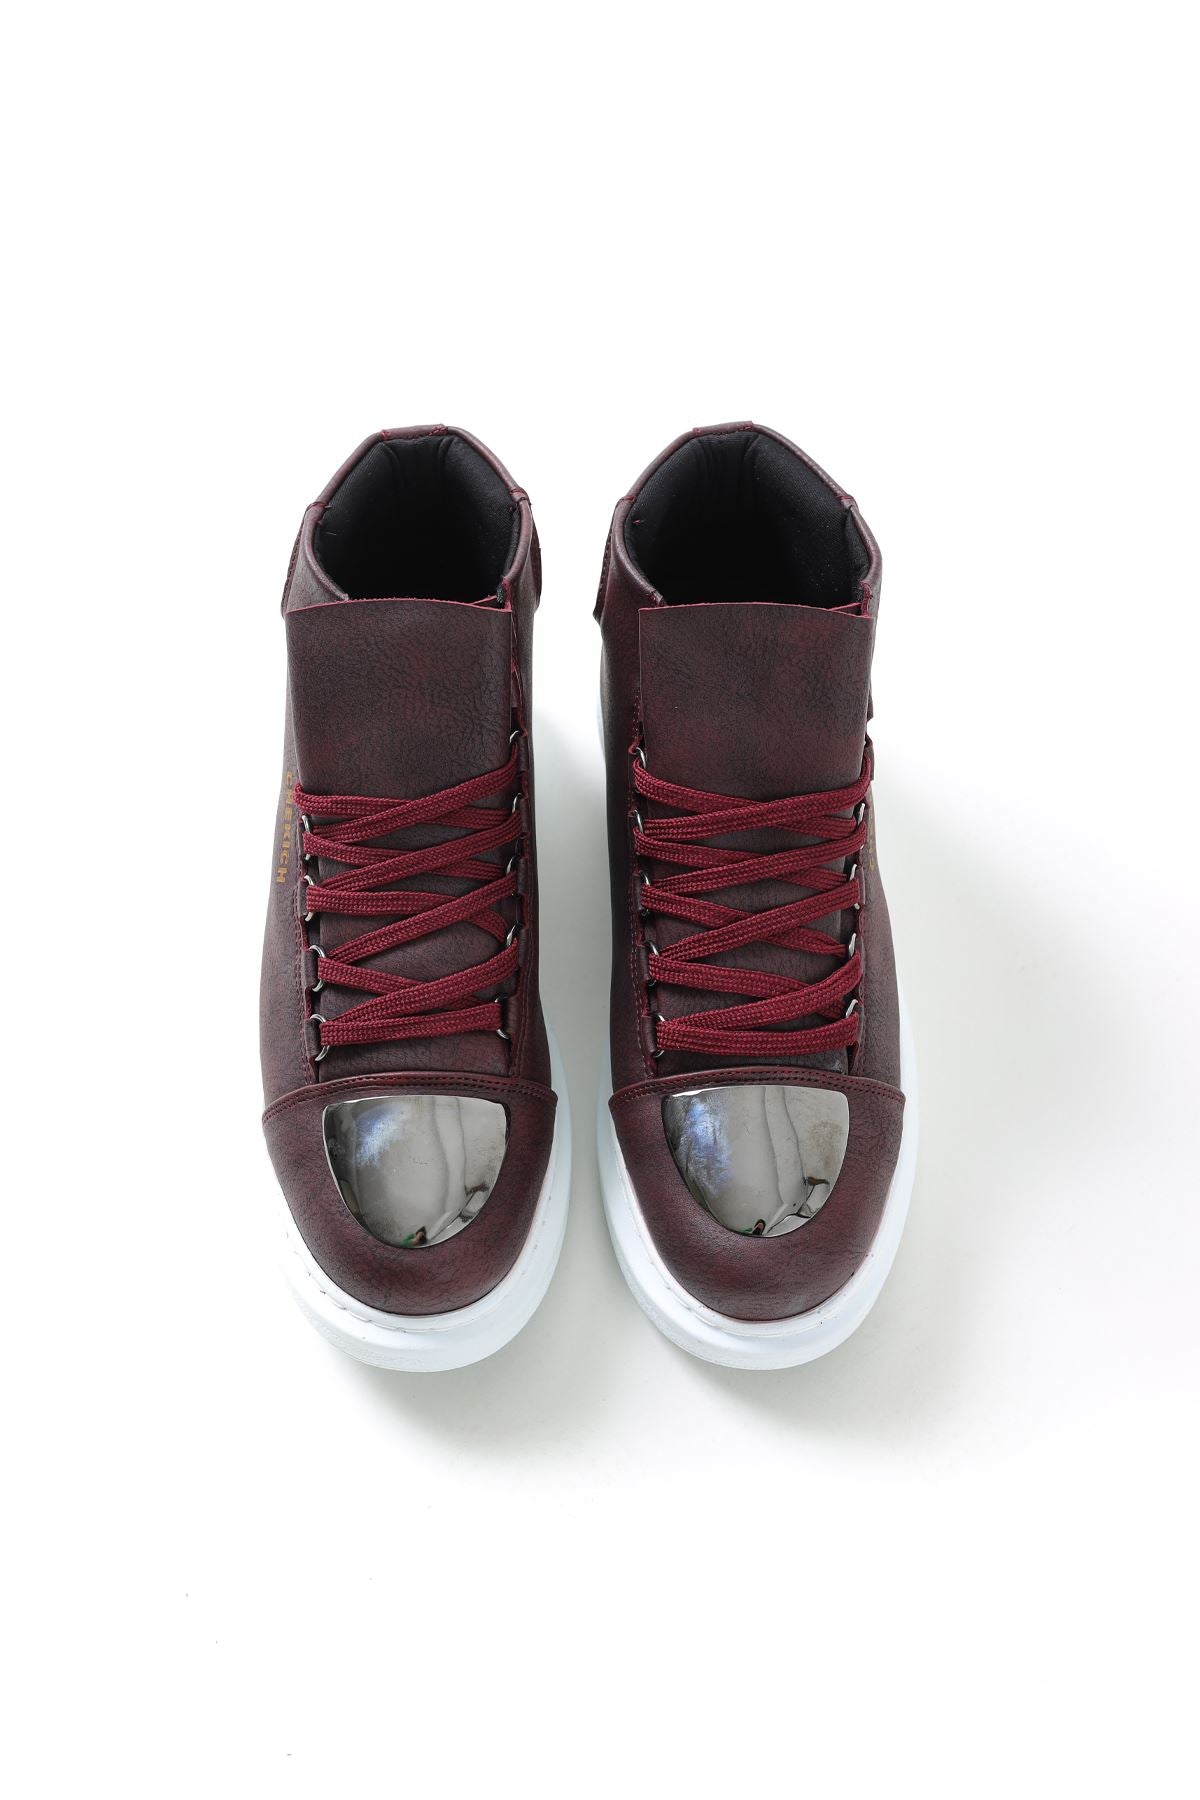 CH267 BT Men's Boots MAROON - STREETMODE ™